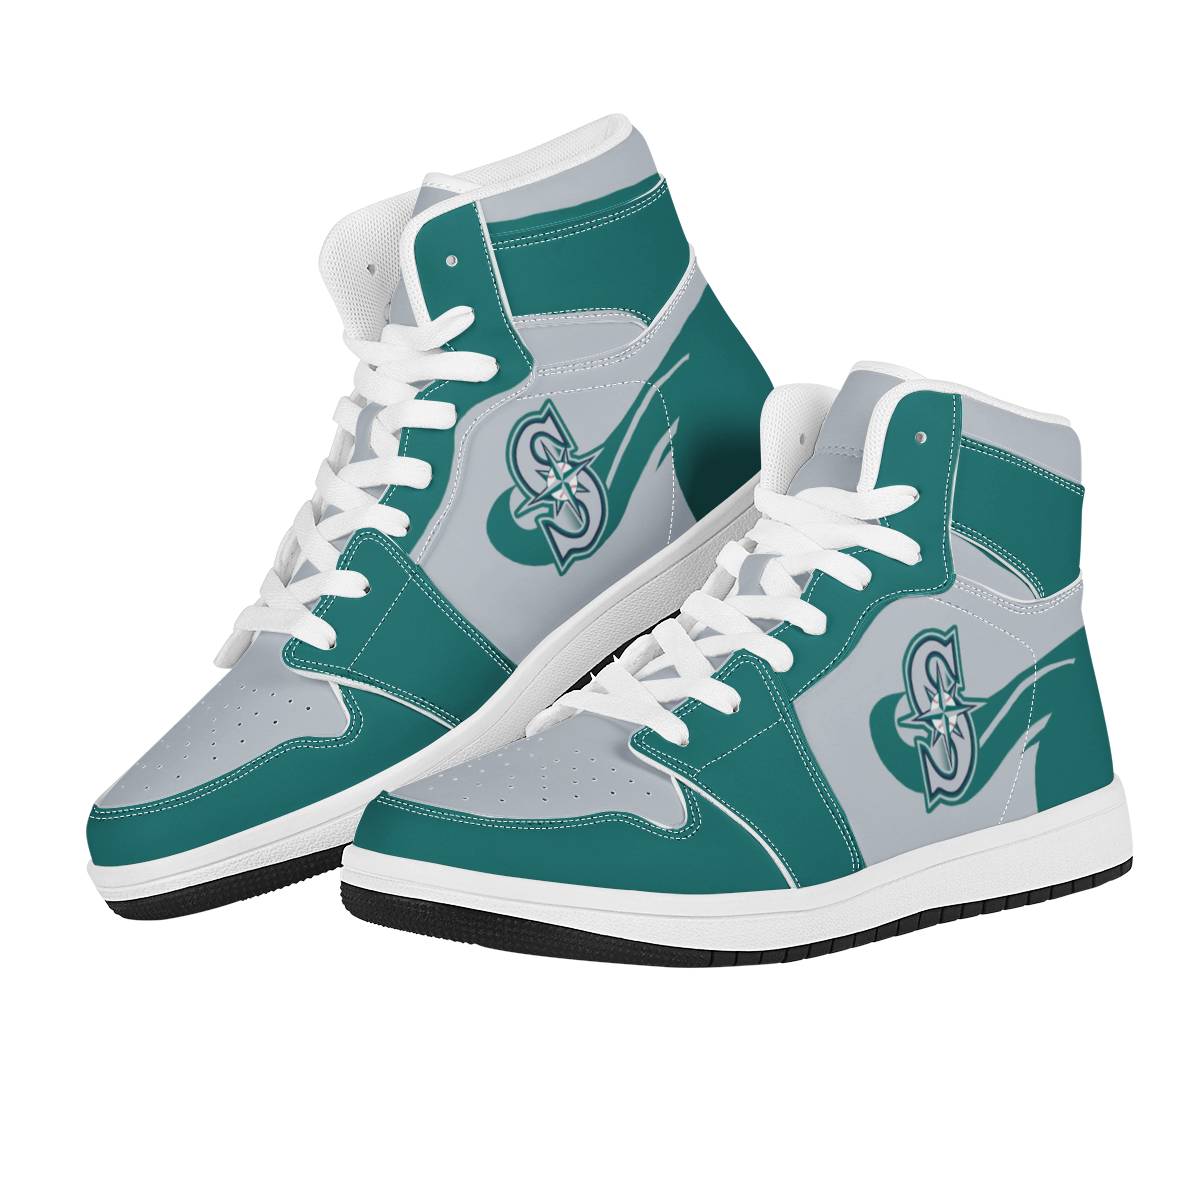 Men's Seattle Mariners High Top Leather AJ1 Sneakers 001